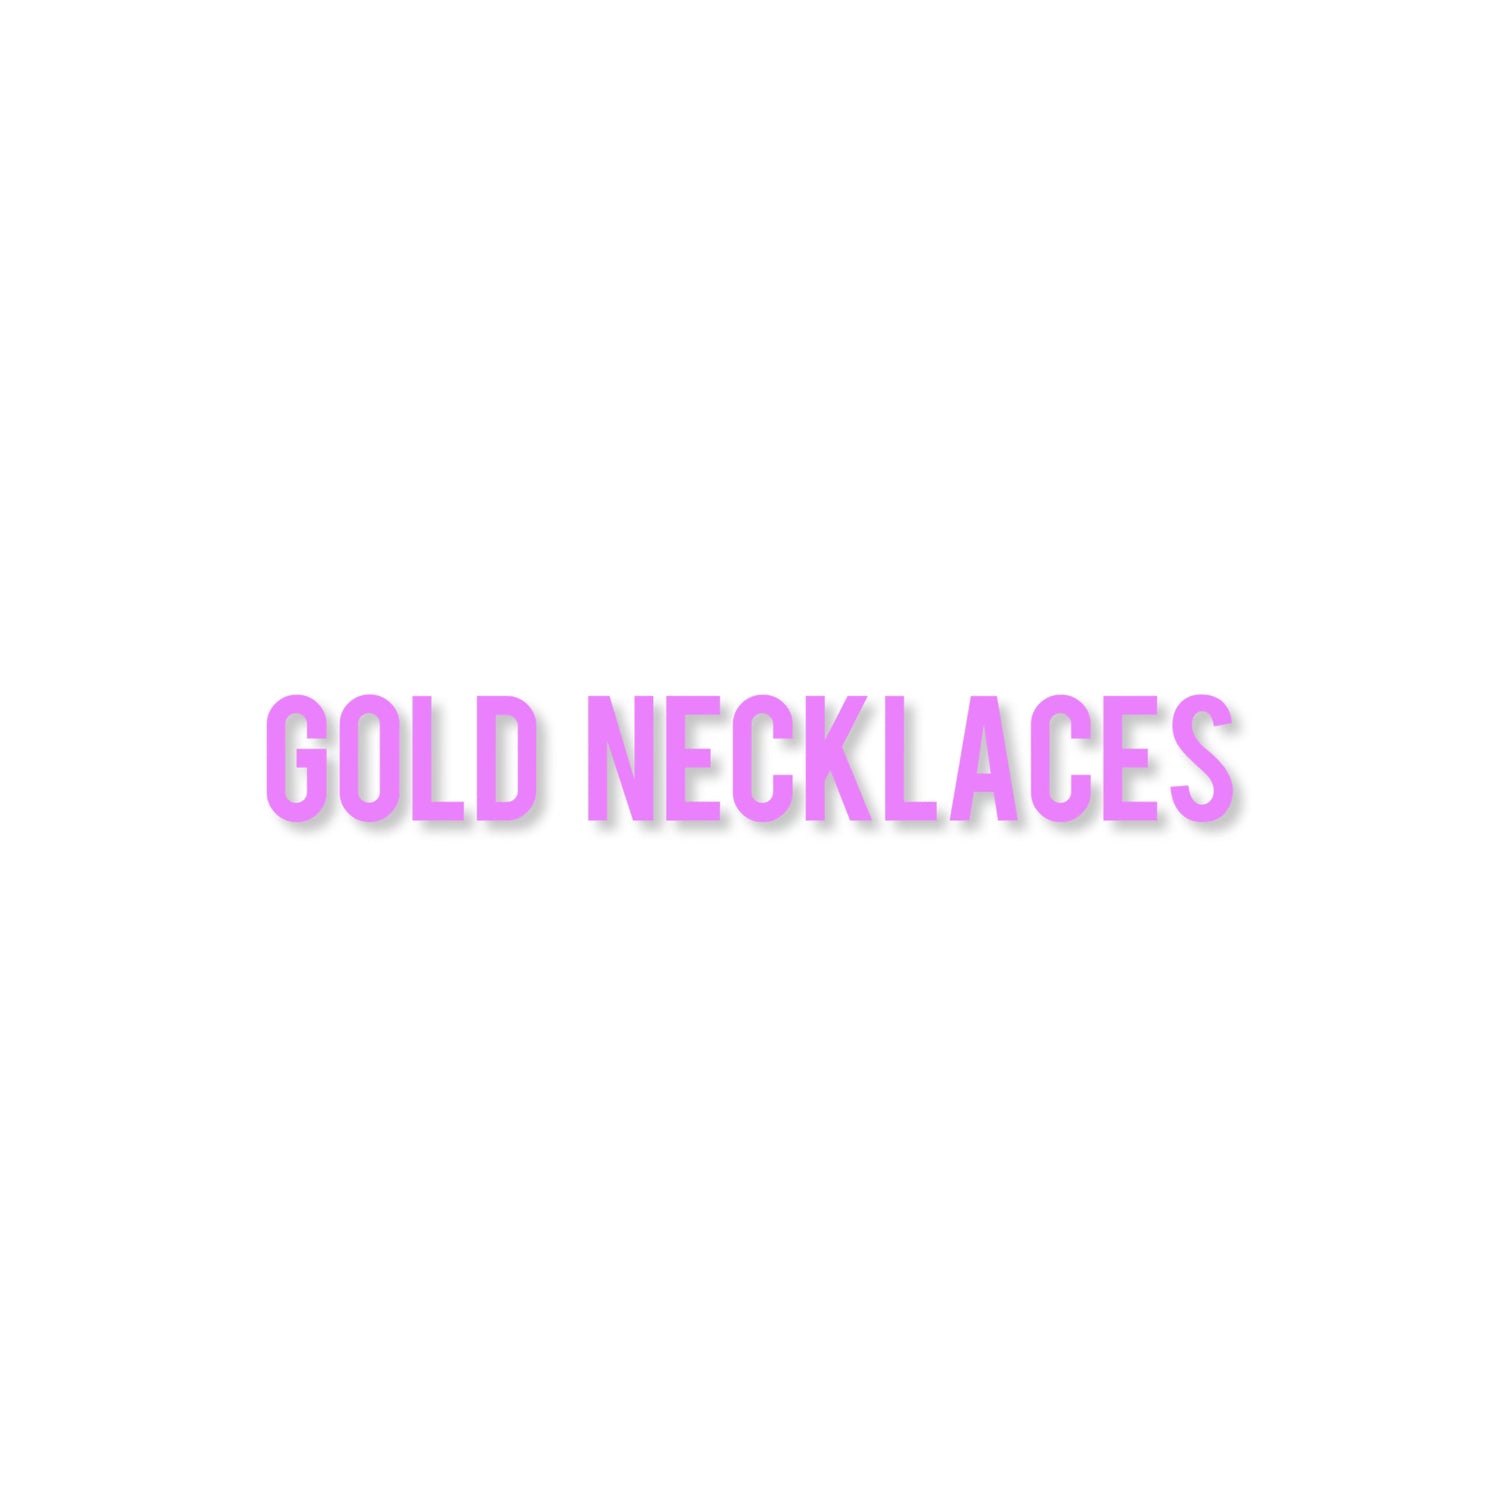 GOLD NECKLACES